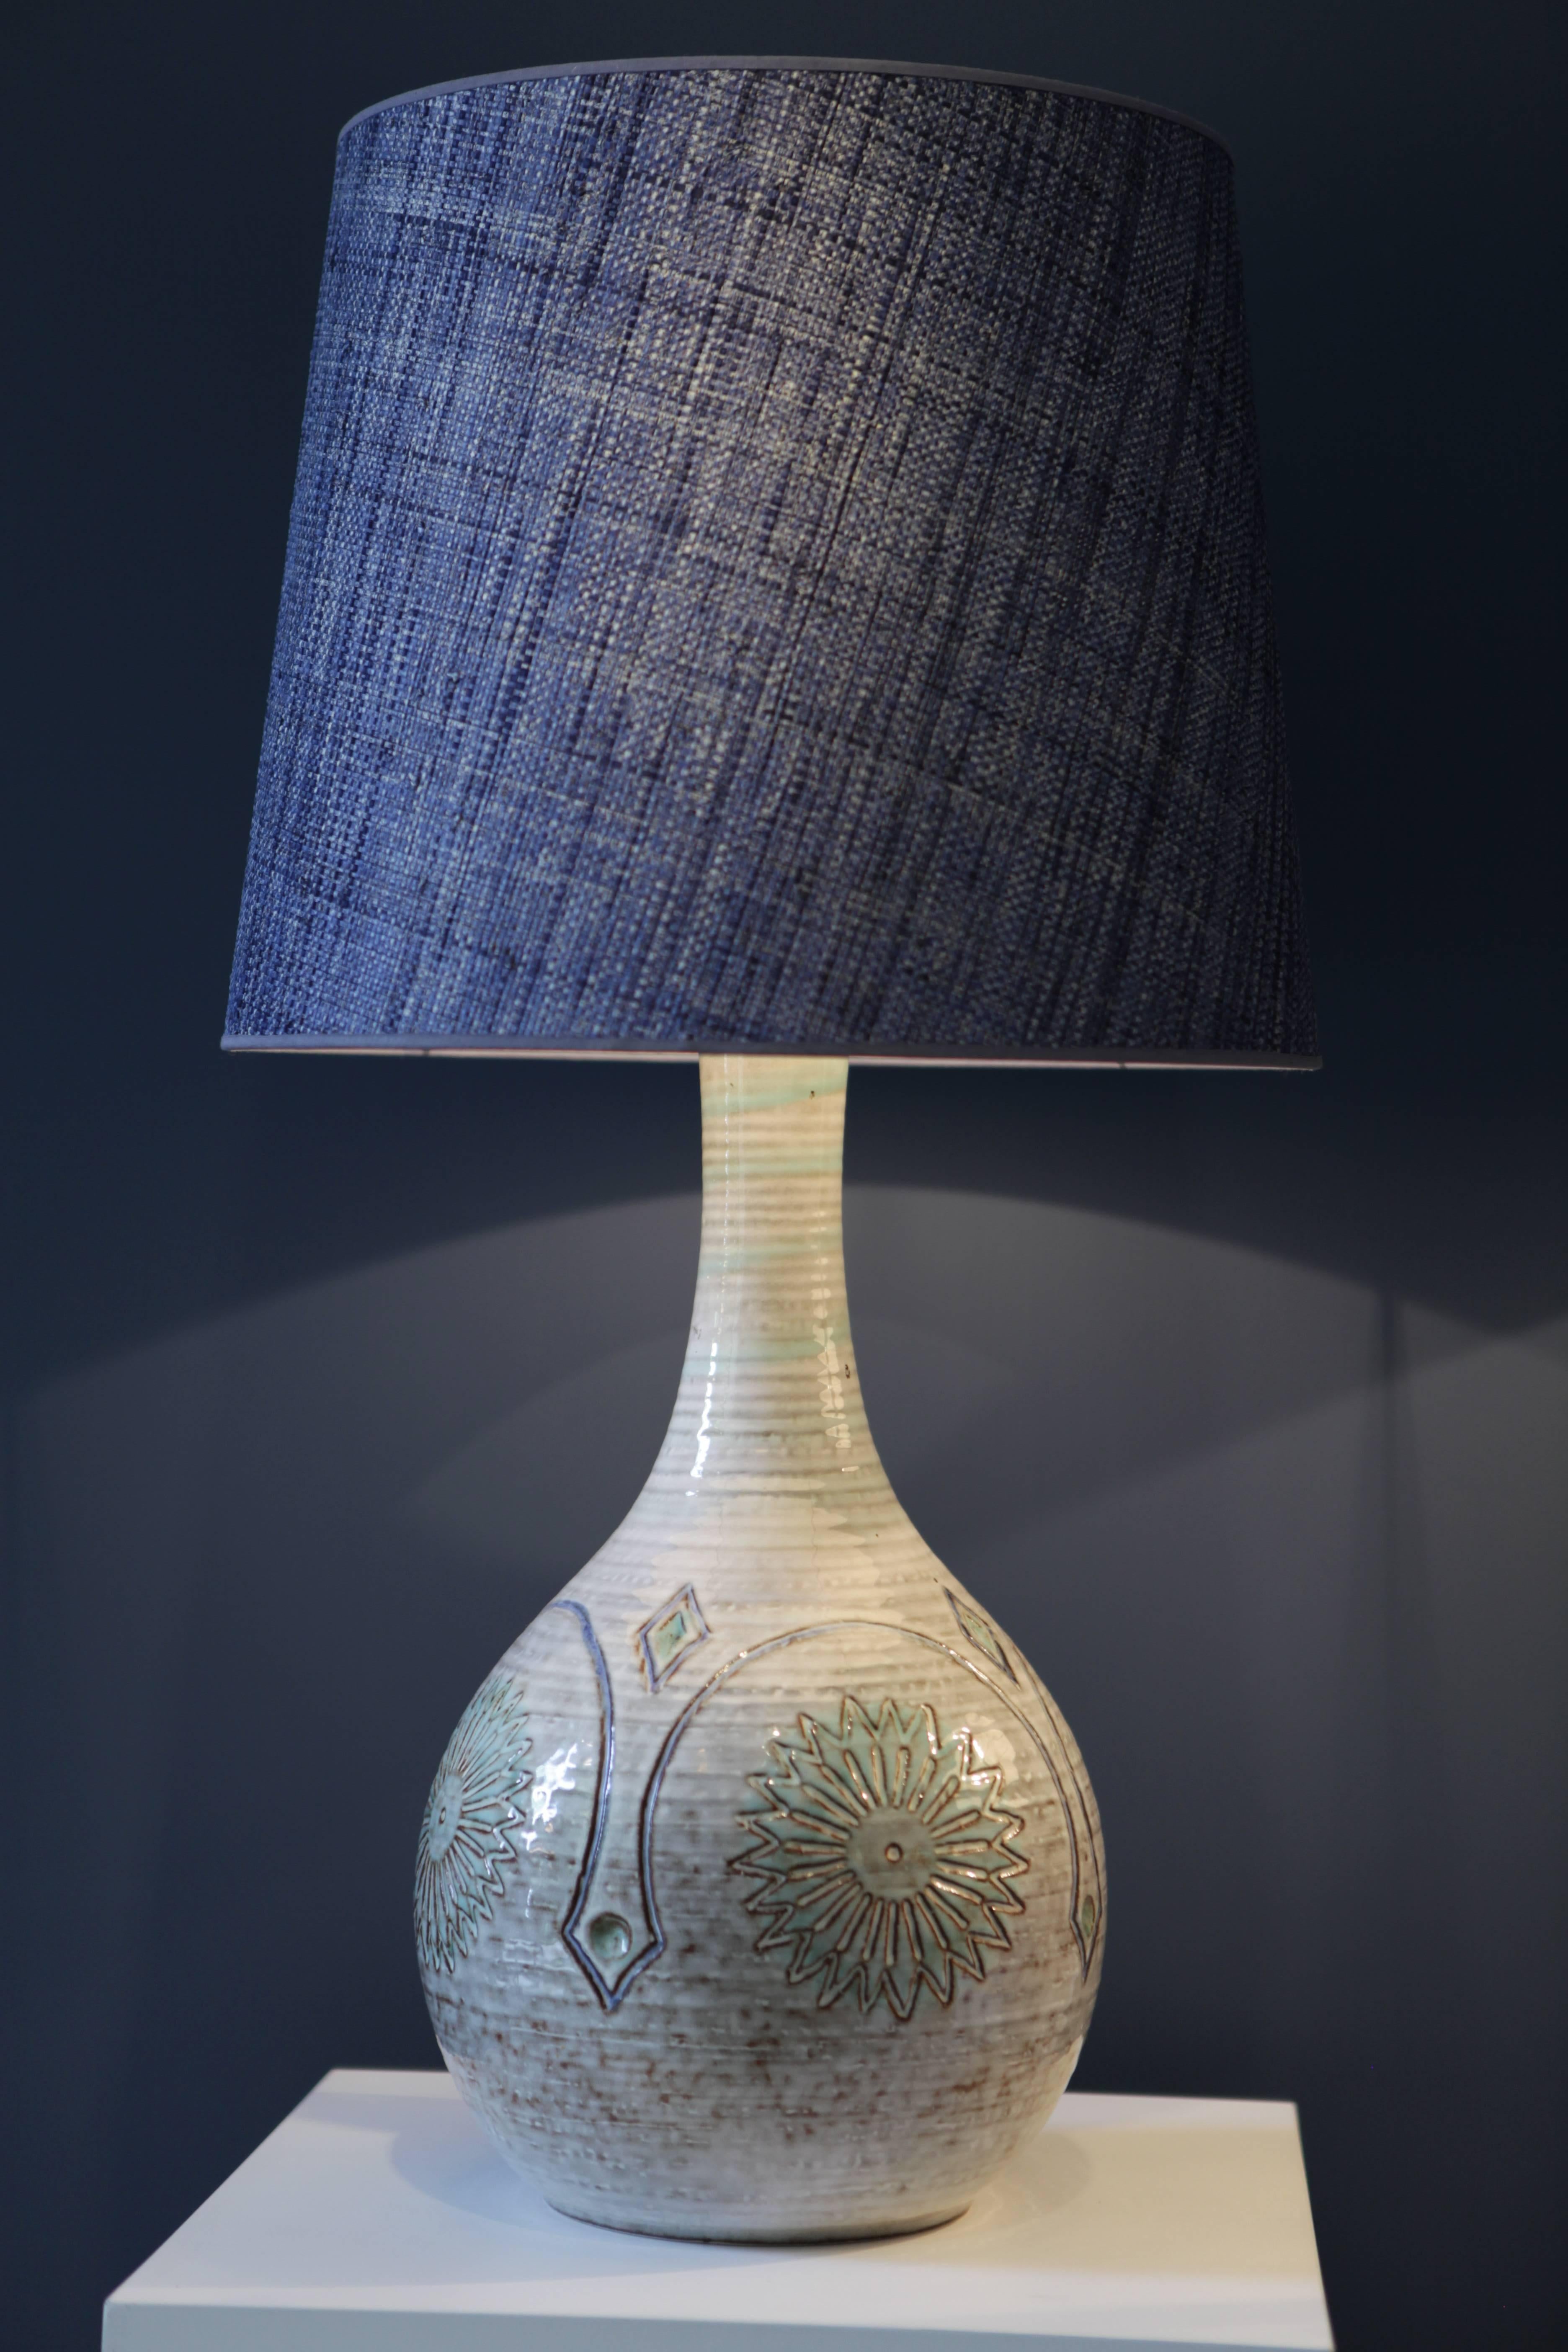 A pair of large and beautiful stoneware table-lamps
Signed to the underside 'Bornholms Stentøj Søholm Denmark'
Midcentury relief design in soft blues and greens on a light pastel colored ground, glazed
Special handmade denim blue raffia shades,